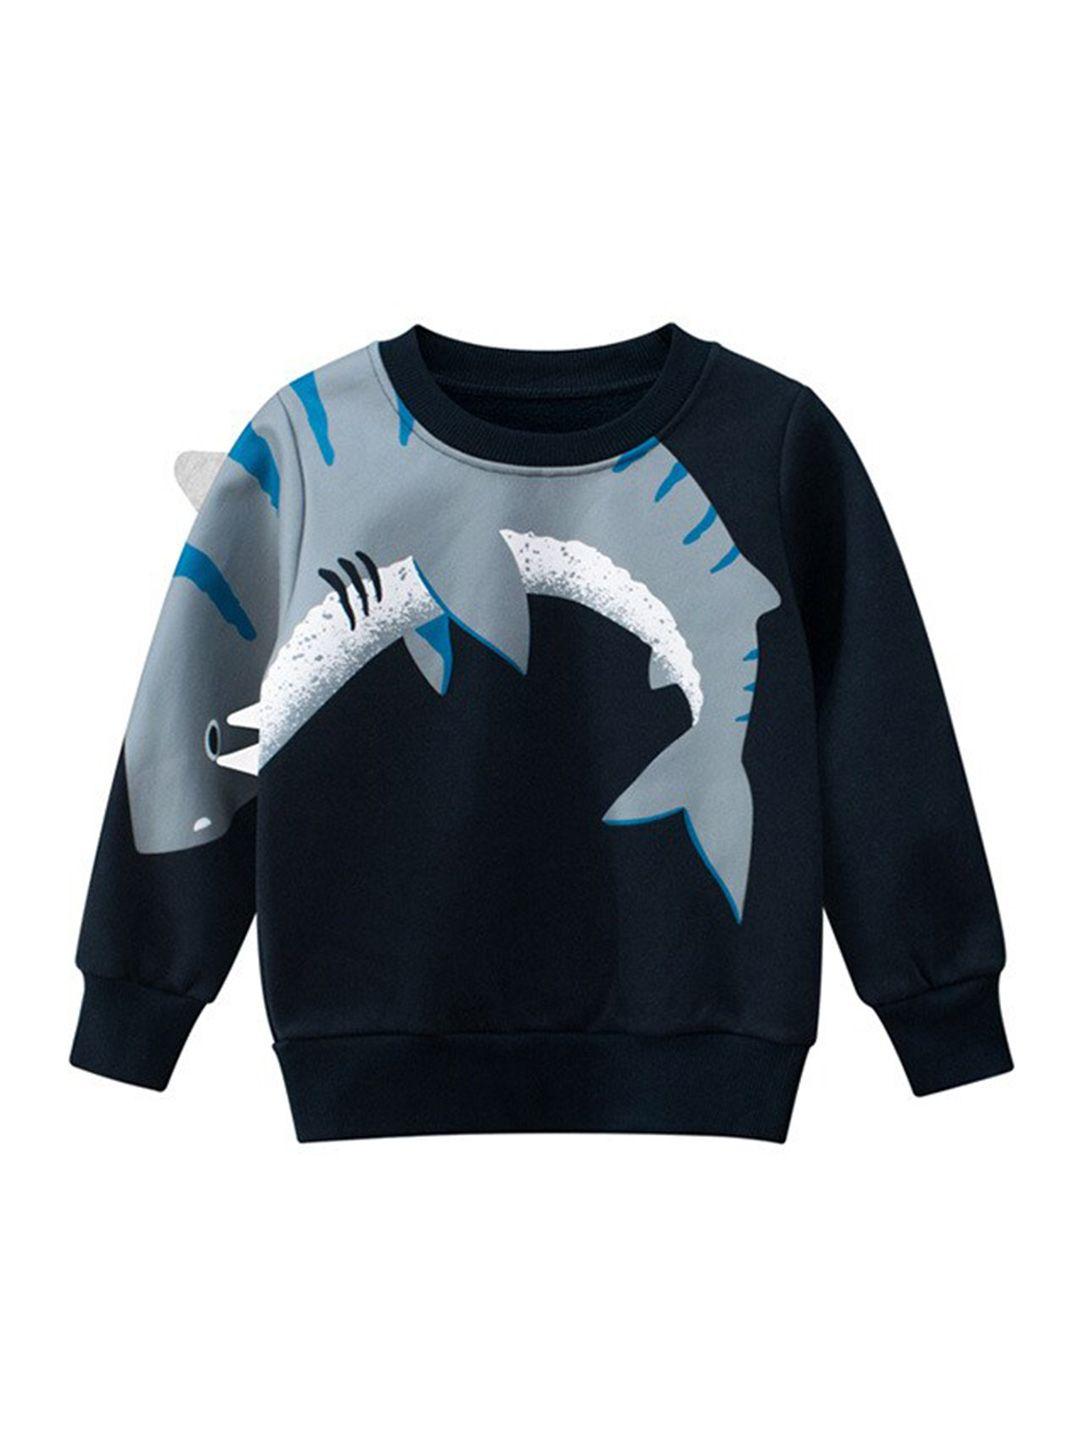 stylecast-boys-navy-blue-graphic-printed-ribbed-cotton-pullover